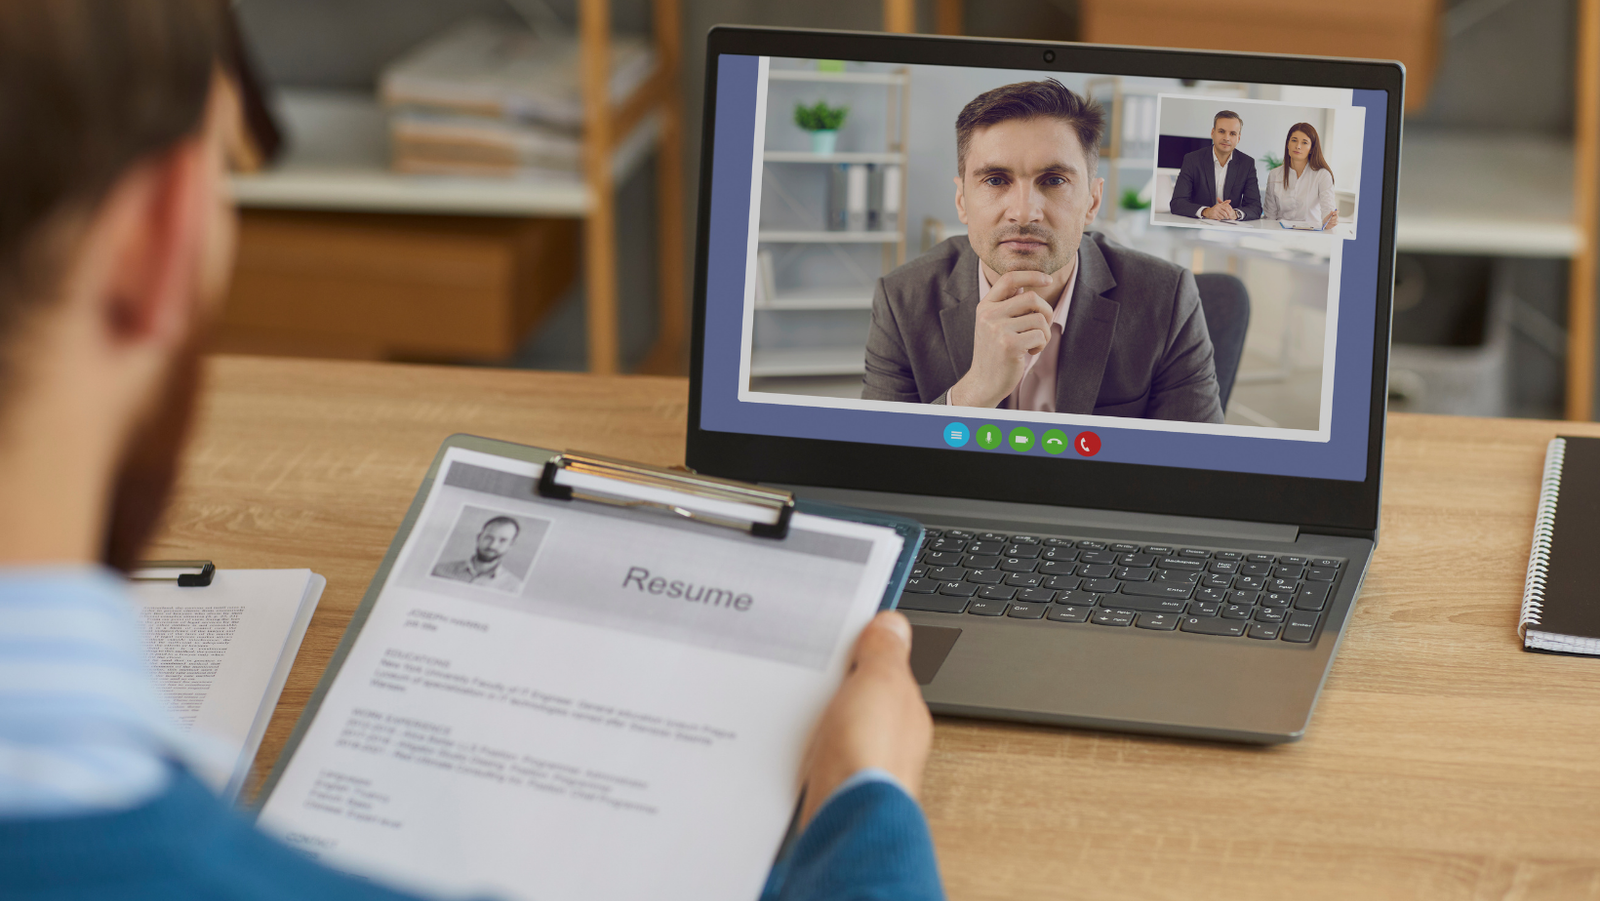 people in a video call seen from a laptop screen